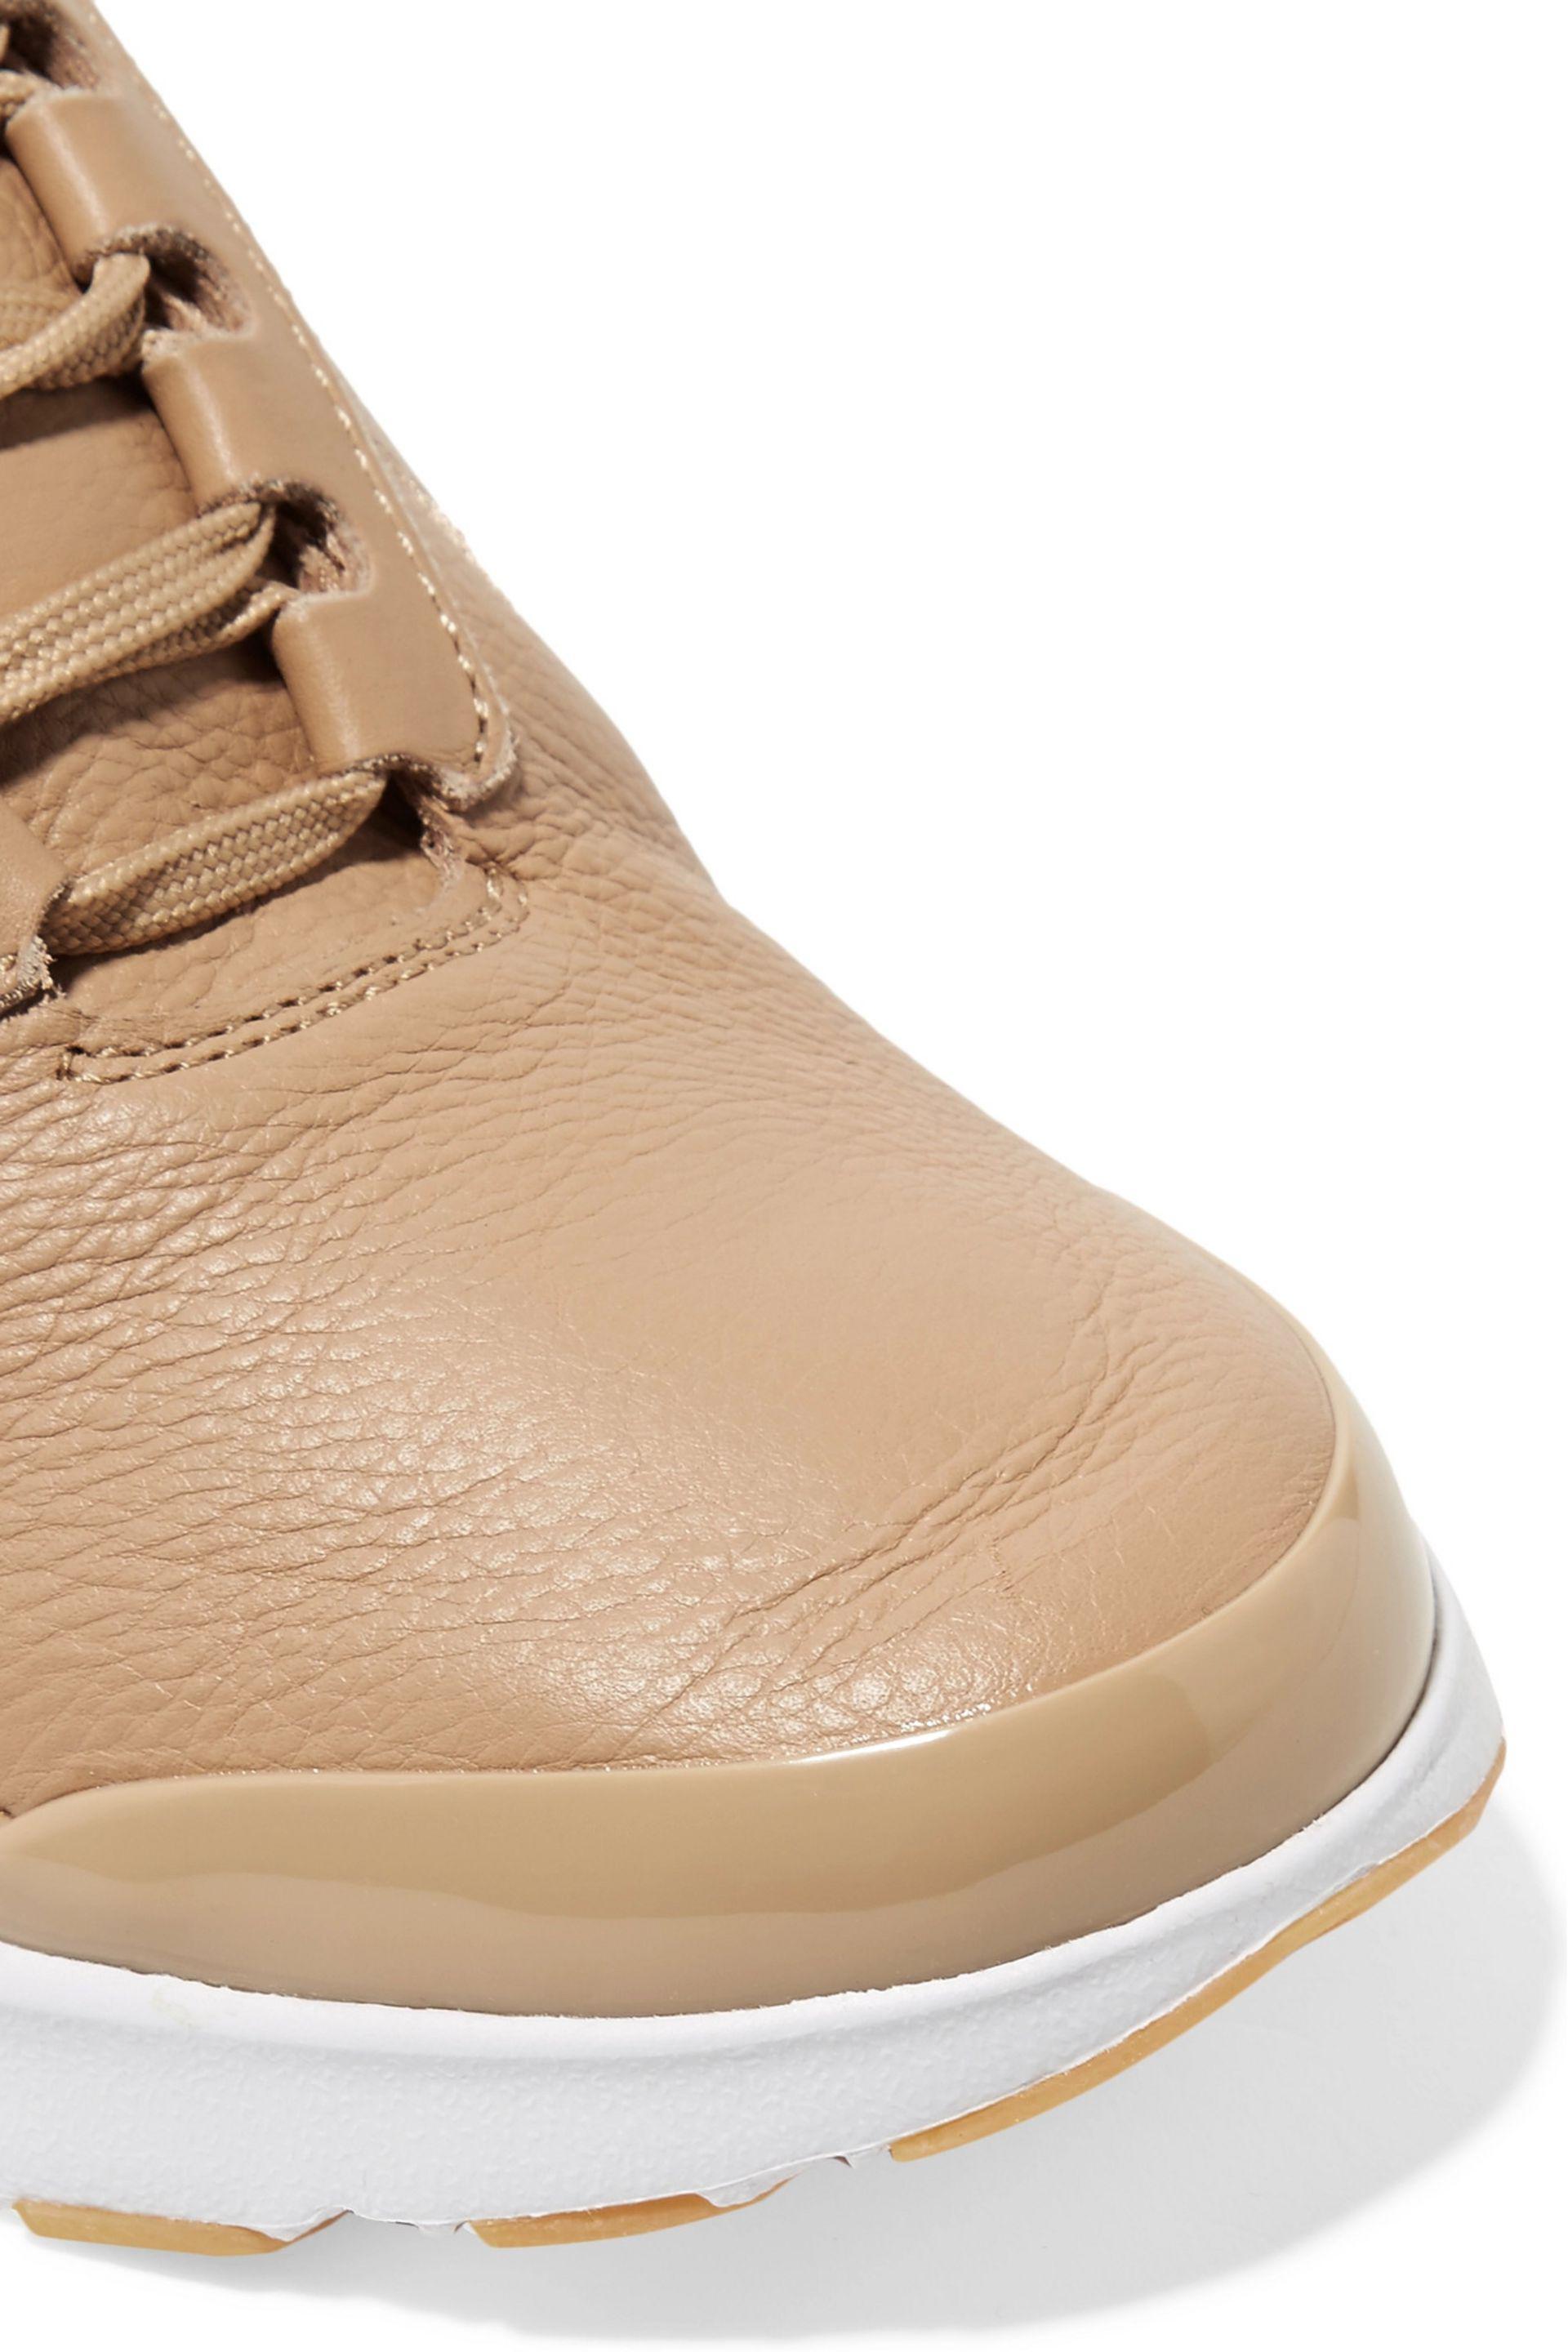 Nike Max Jewell Lx Leather And Tortoiseshell in Natural | Lyst